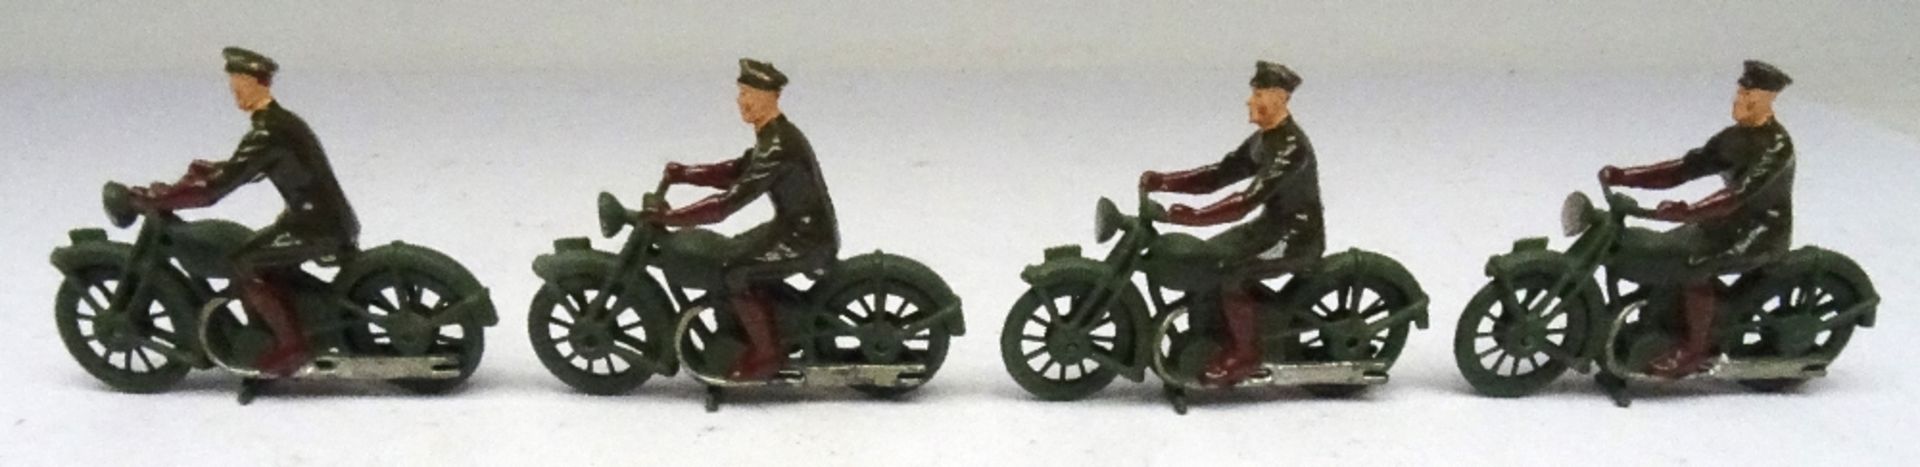 Britains set 1791, Dispatch Riders on Motorcycles - Image 2 of 6